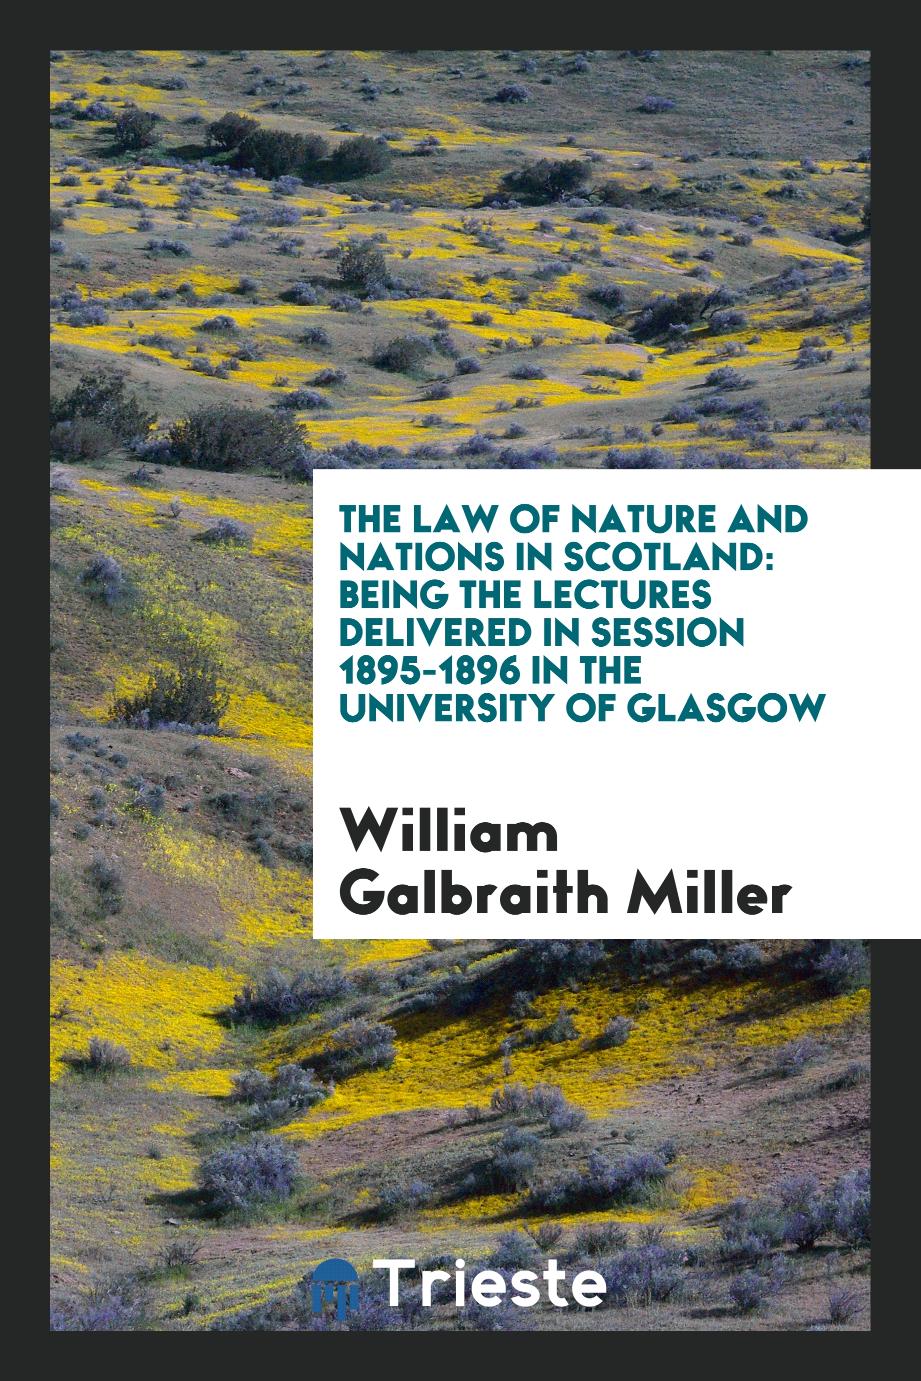 The Law of Nature and Nations in Scotland: Being the Lectures Delivered in Session 1895-1896 in the University of Glasgow